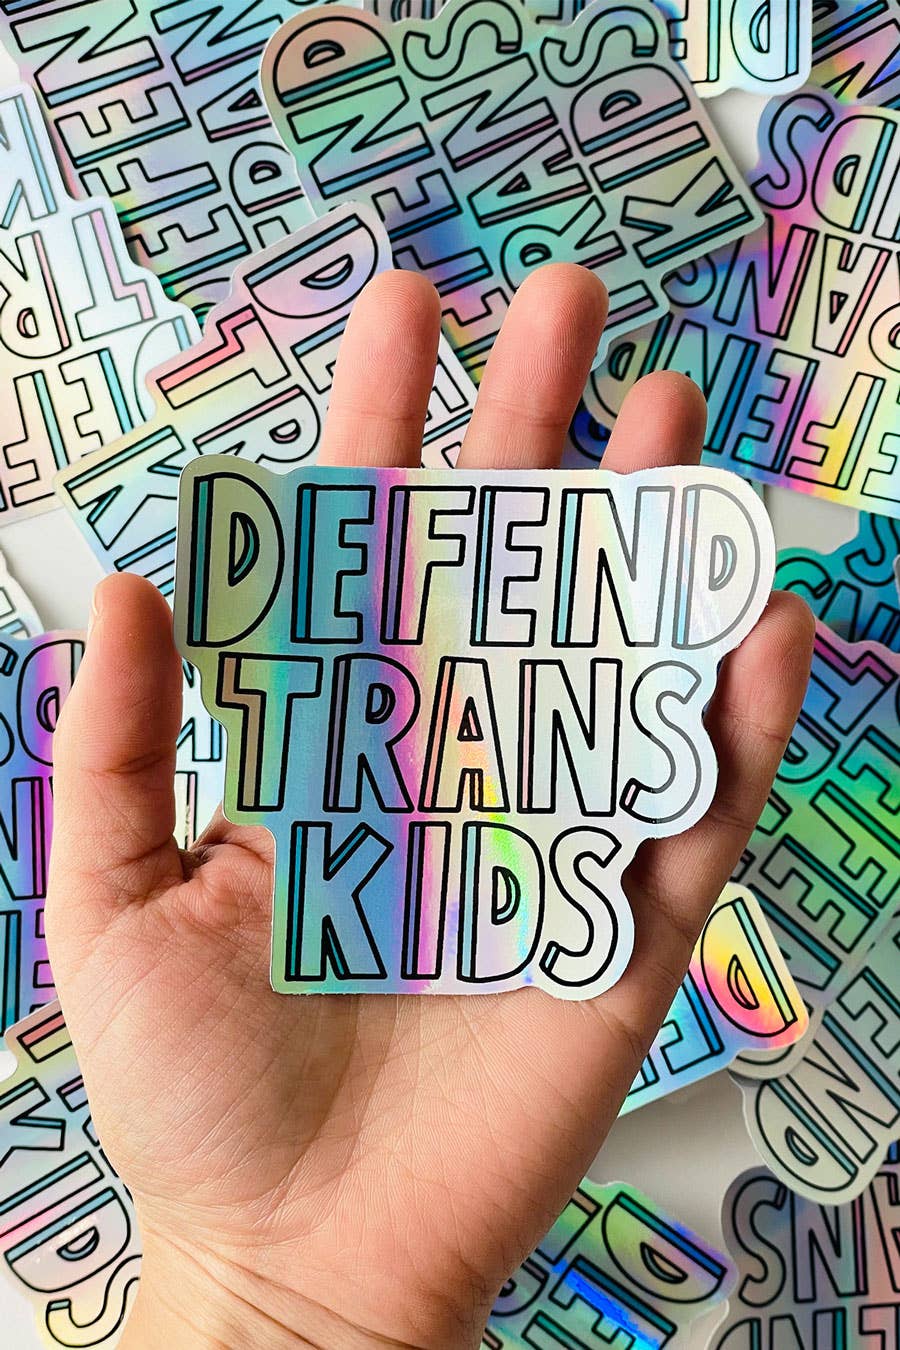 a hand holding a holographic vinyl sticker with the words "Defend Trans Kids"